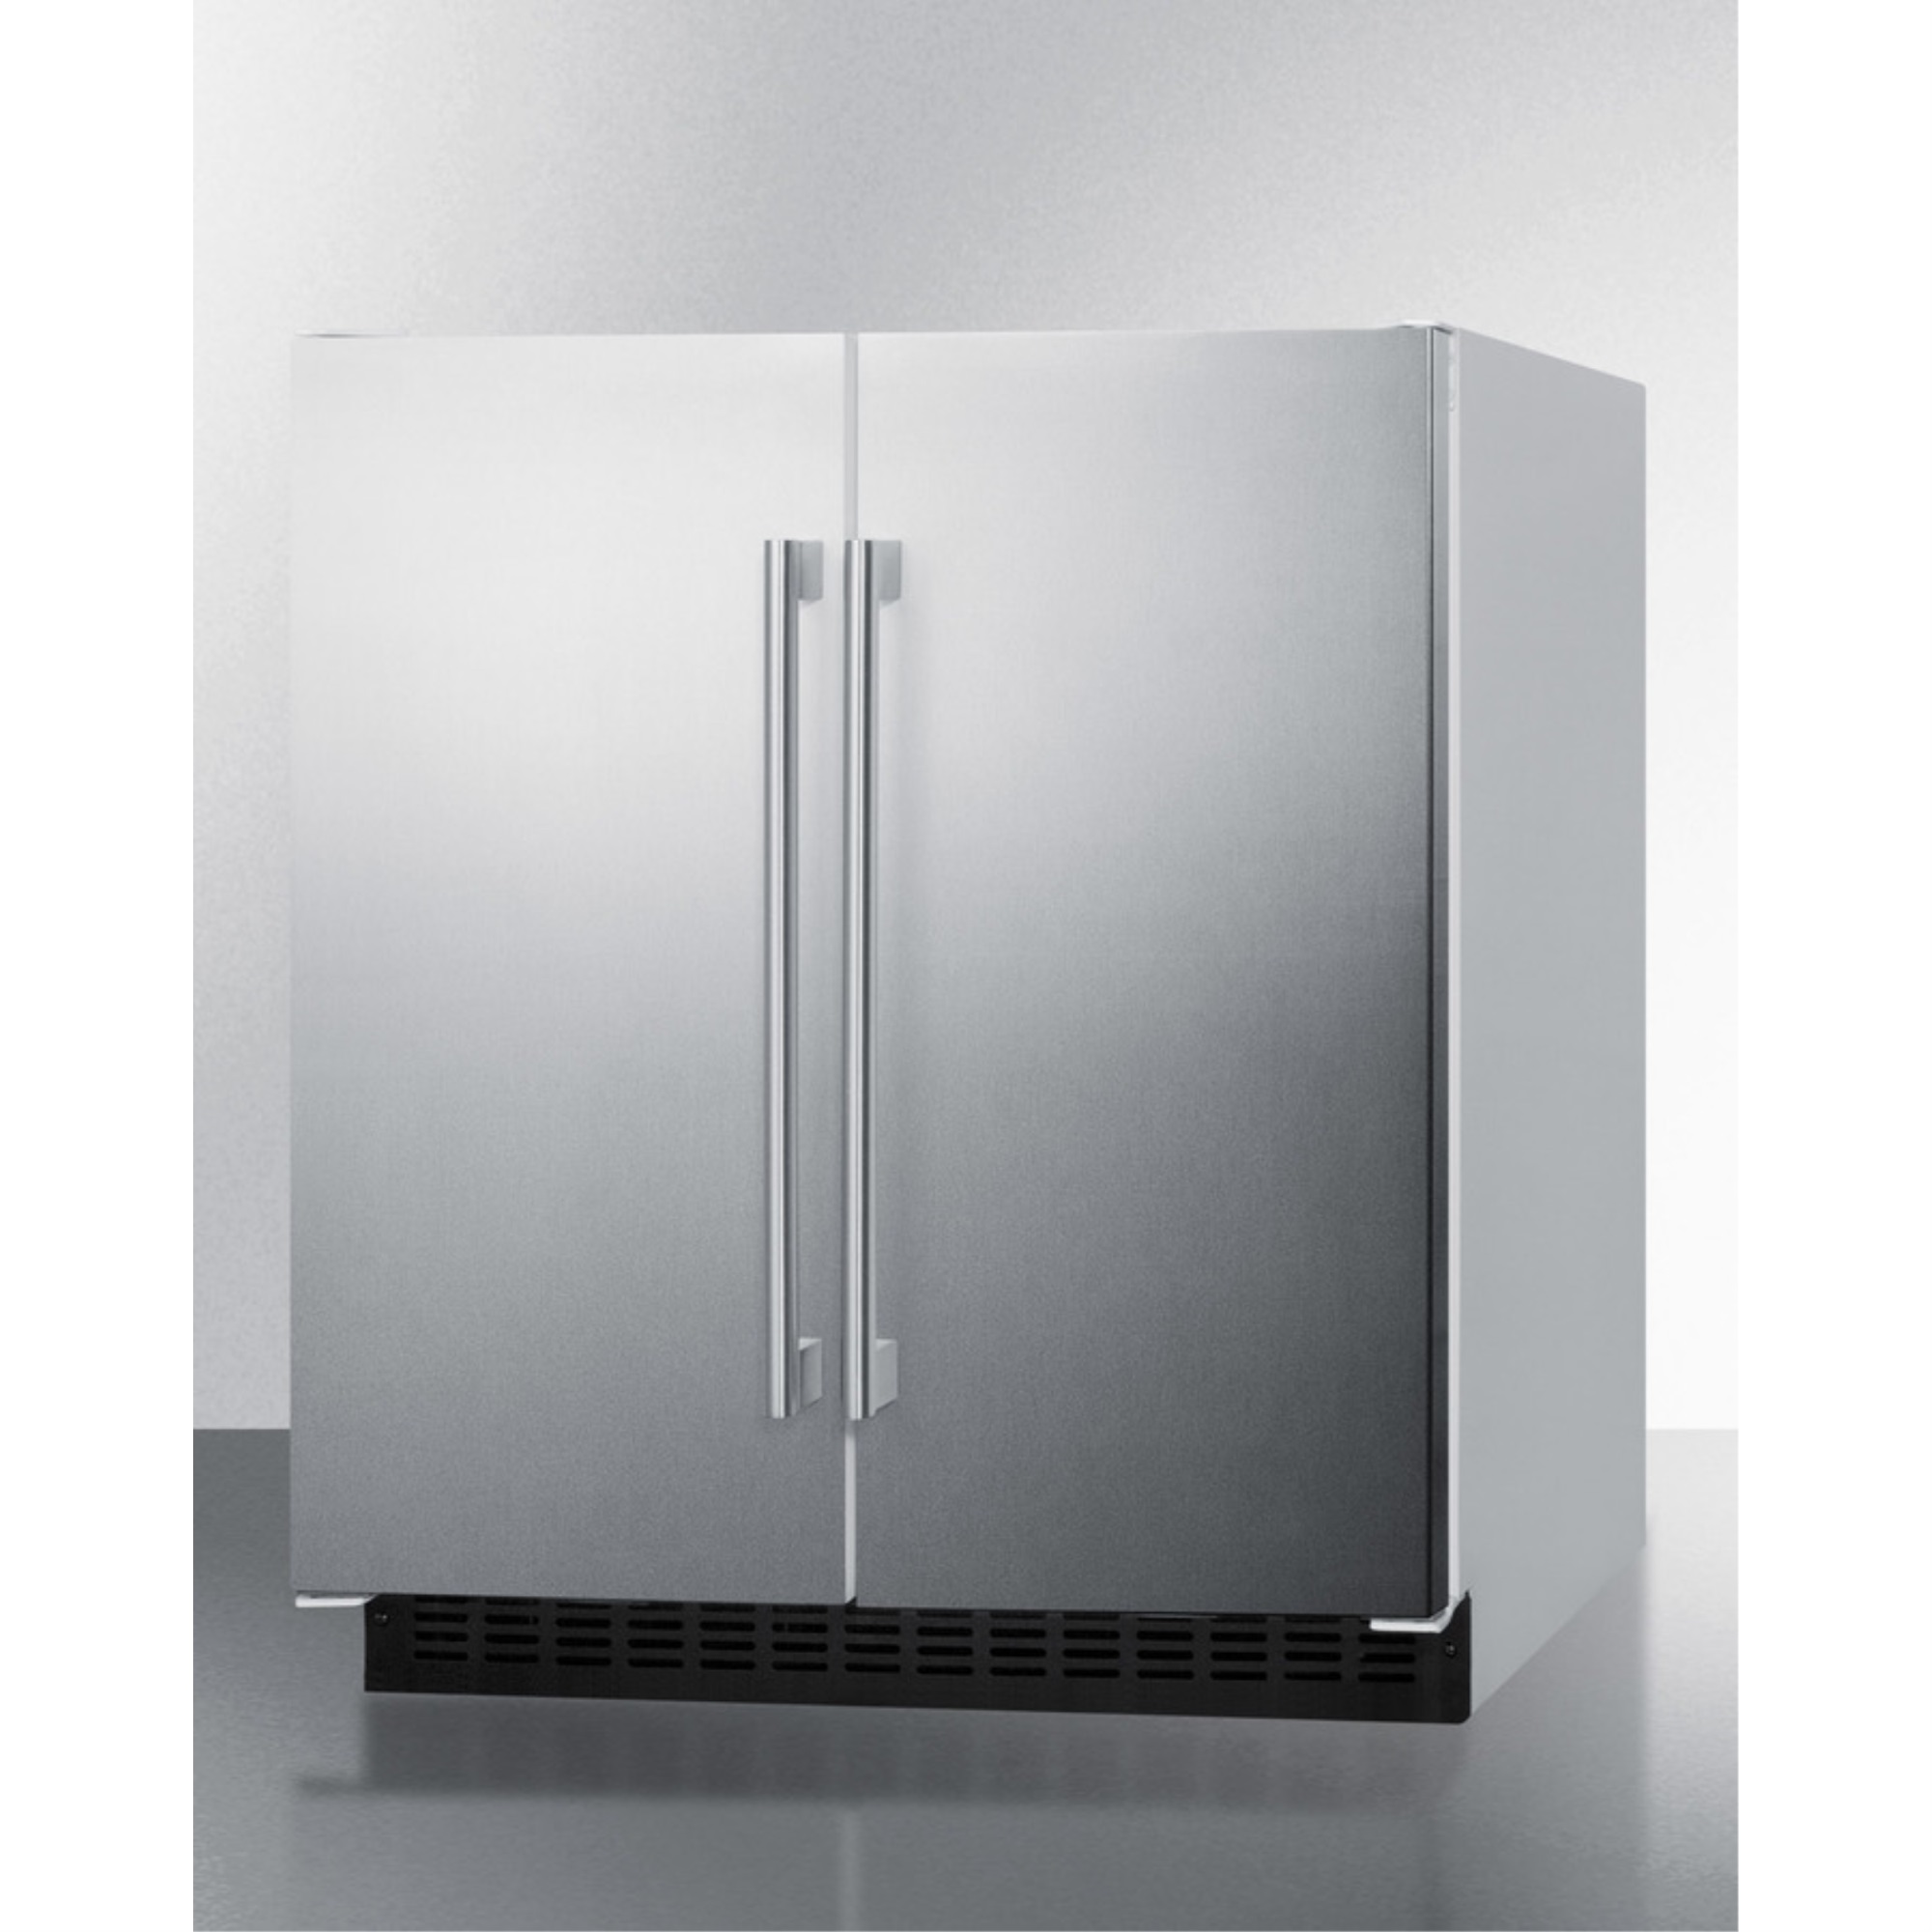 30" wide undercounter frost-free side-by-side refrigerator-freezer with stainless steel doors, white cabinet, locks, stainless steel handles, and digital controls - image 2 of 5